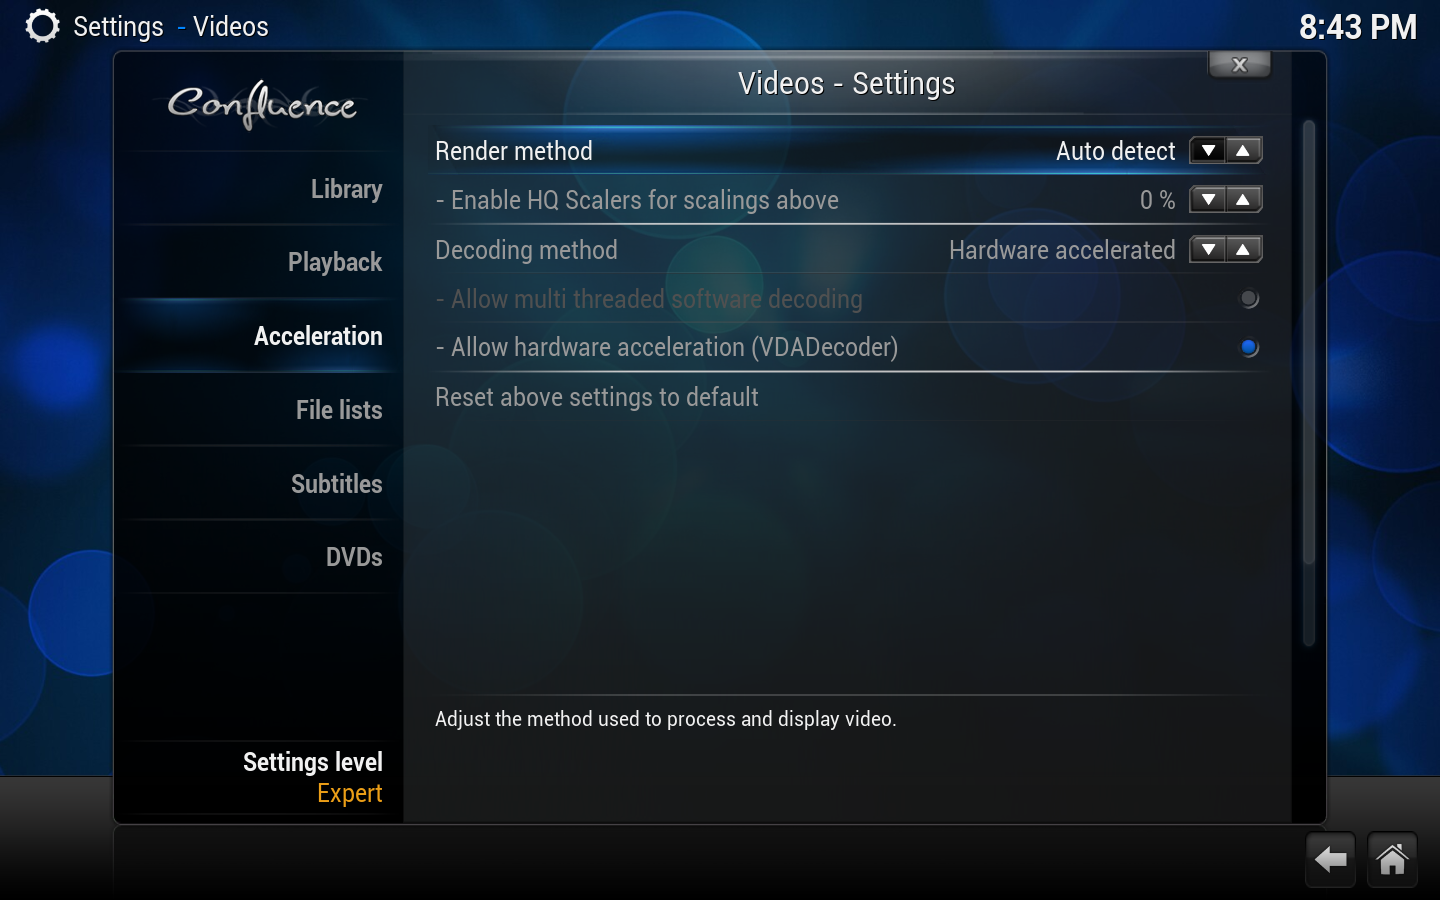 File:Settings.videos.acceleration.png